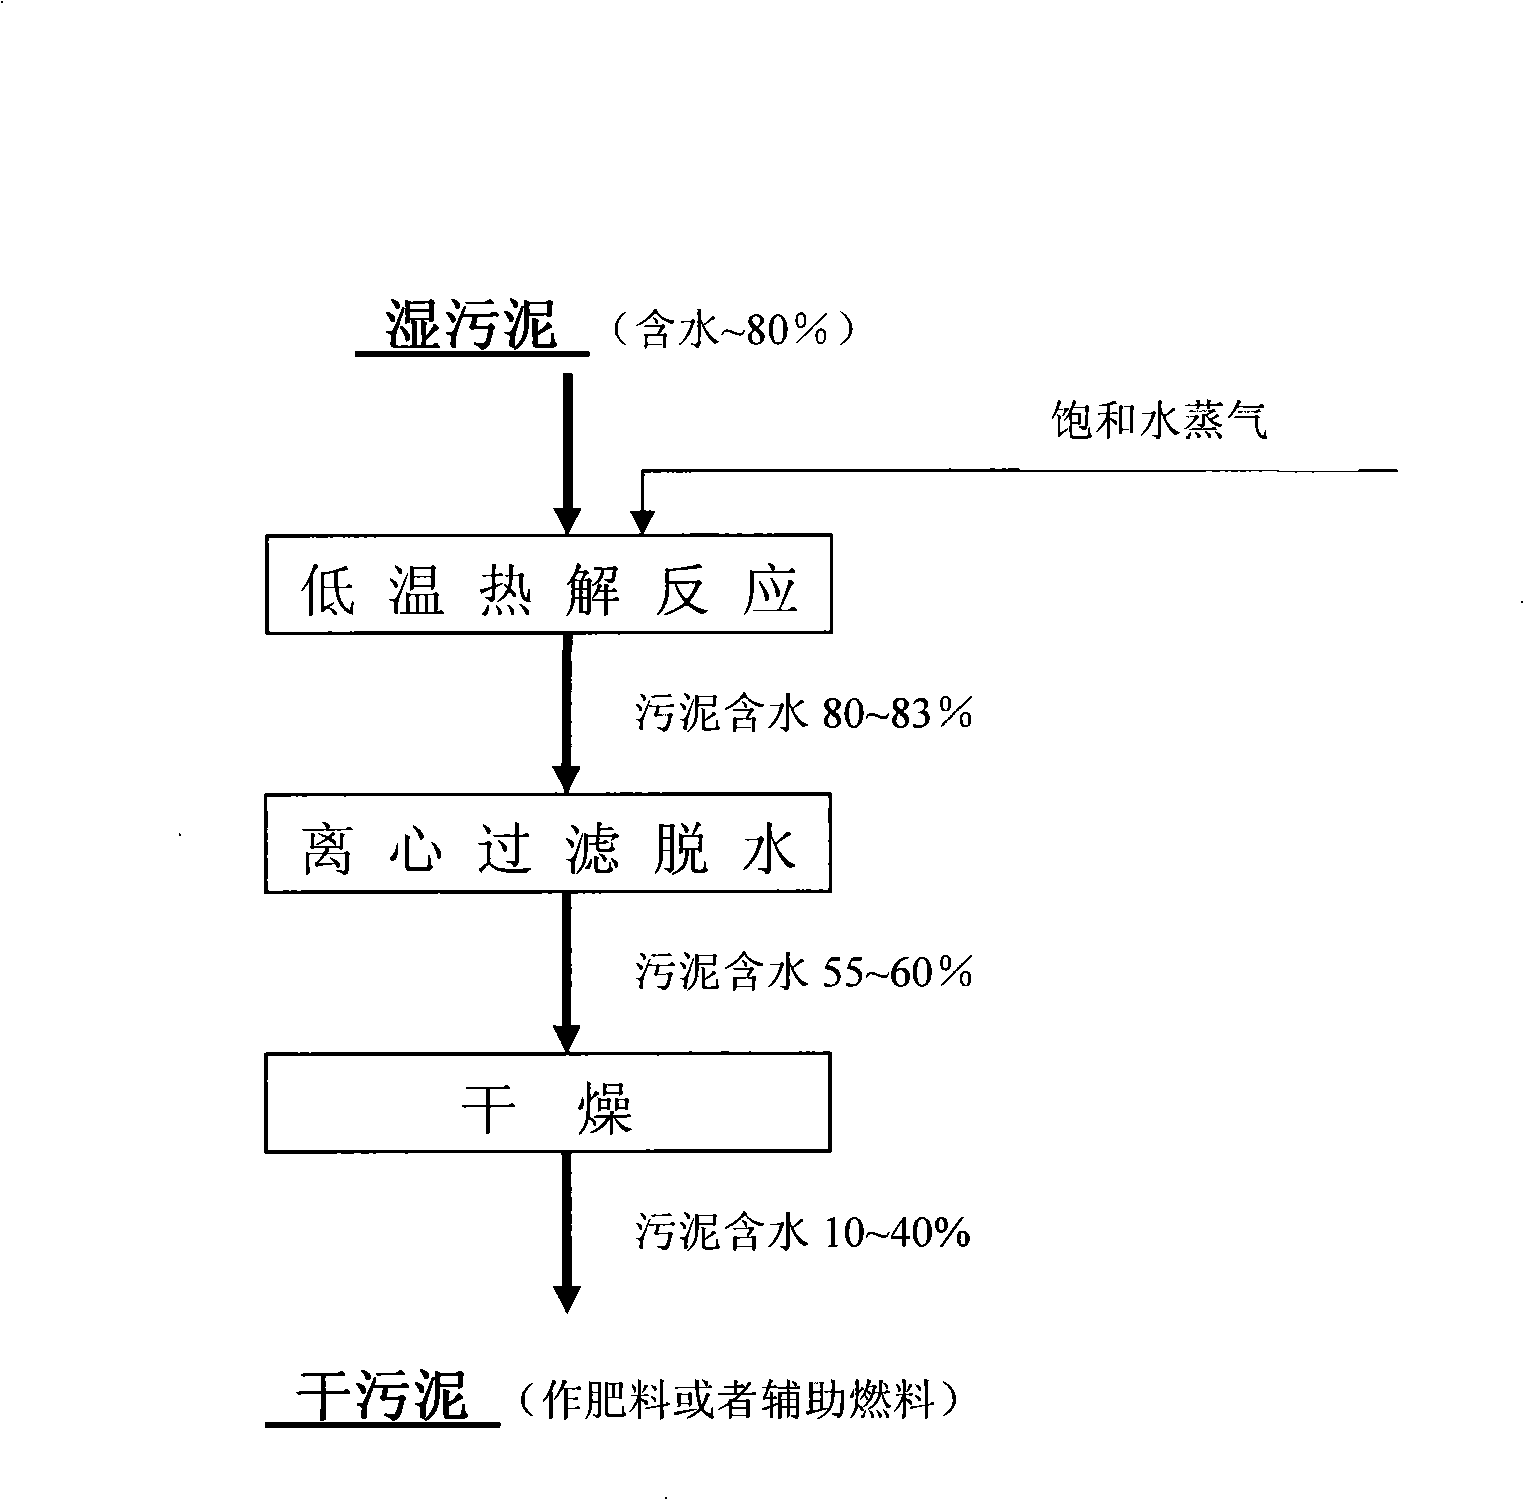 System and process for anhydration treatment of wet sludge